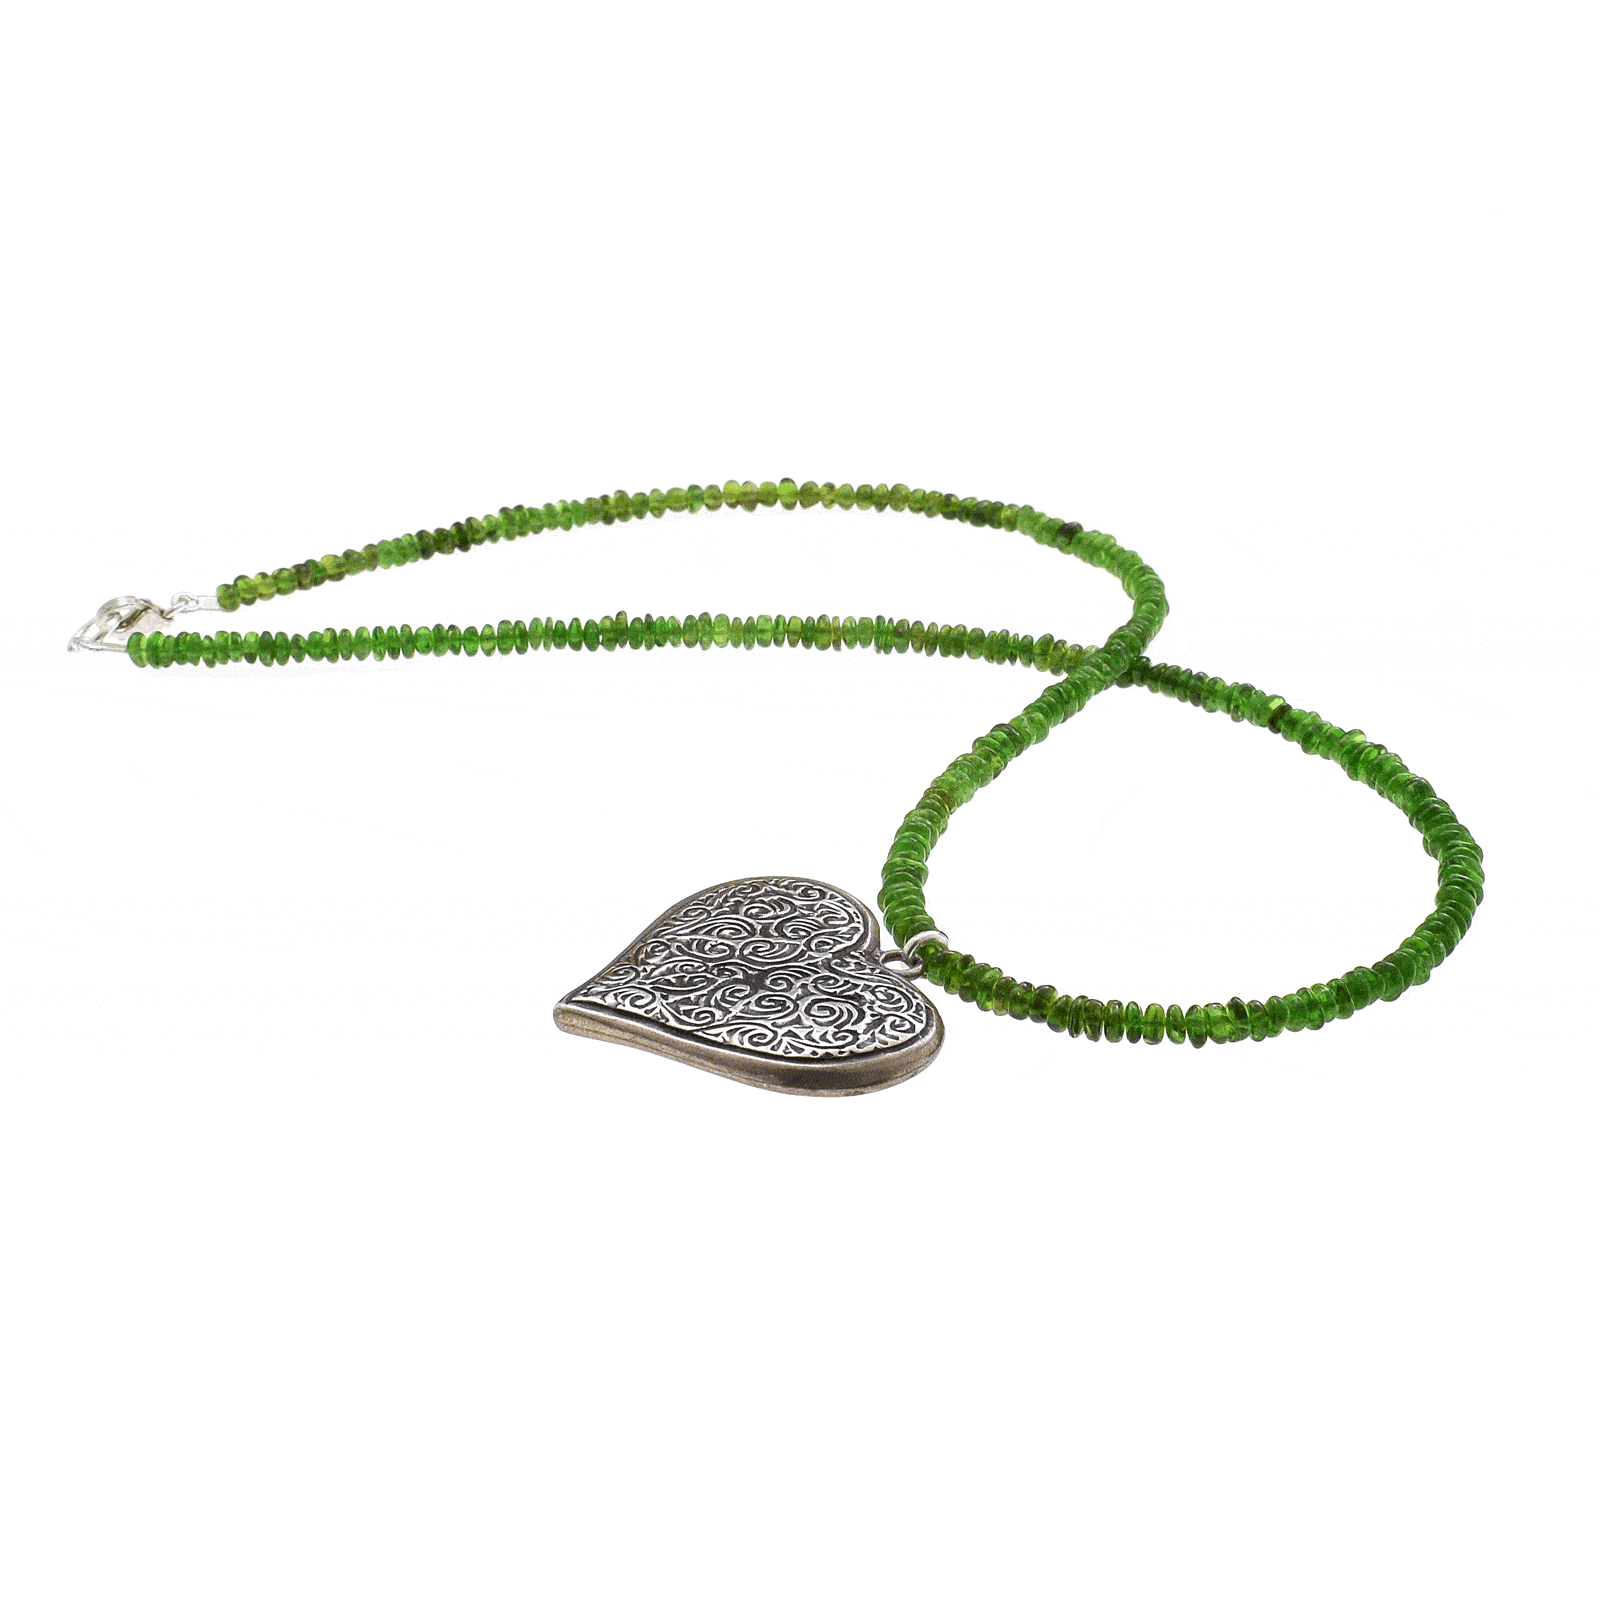 Handmade necklace with natural Diopside gemstones and sterling silver pendant in a heart shape with embossed designs. Buy online shop.